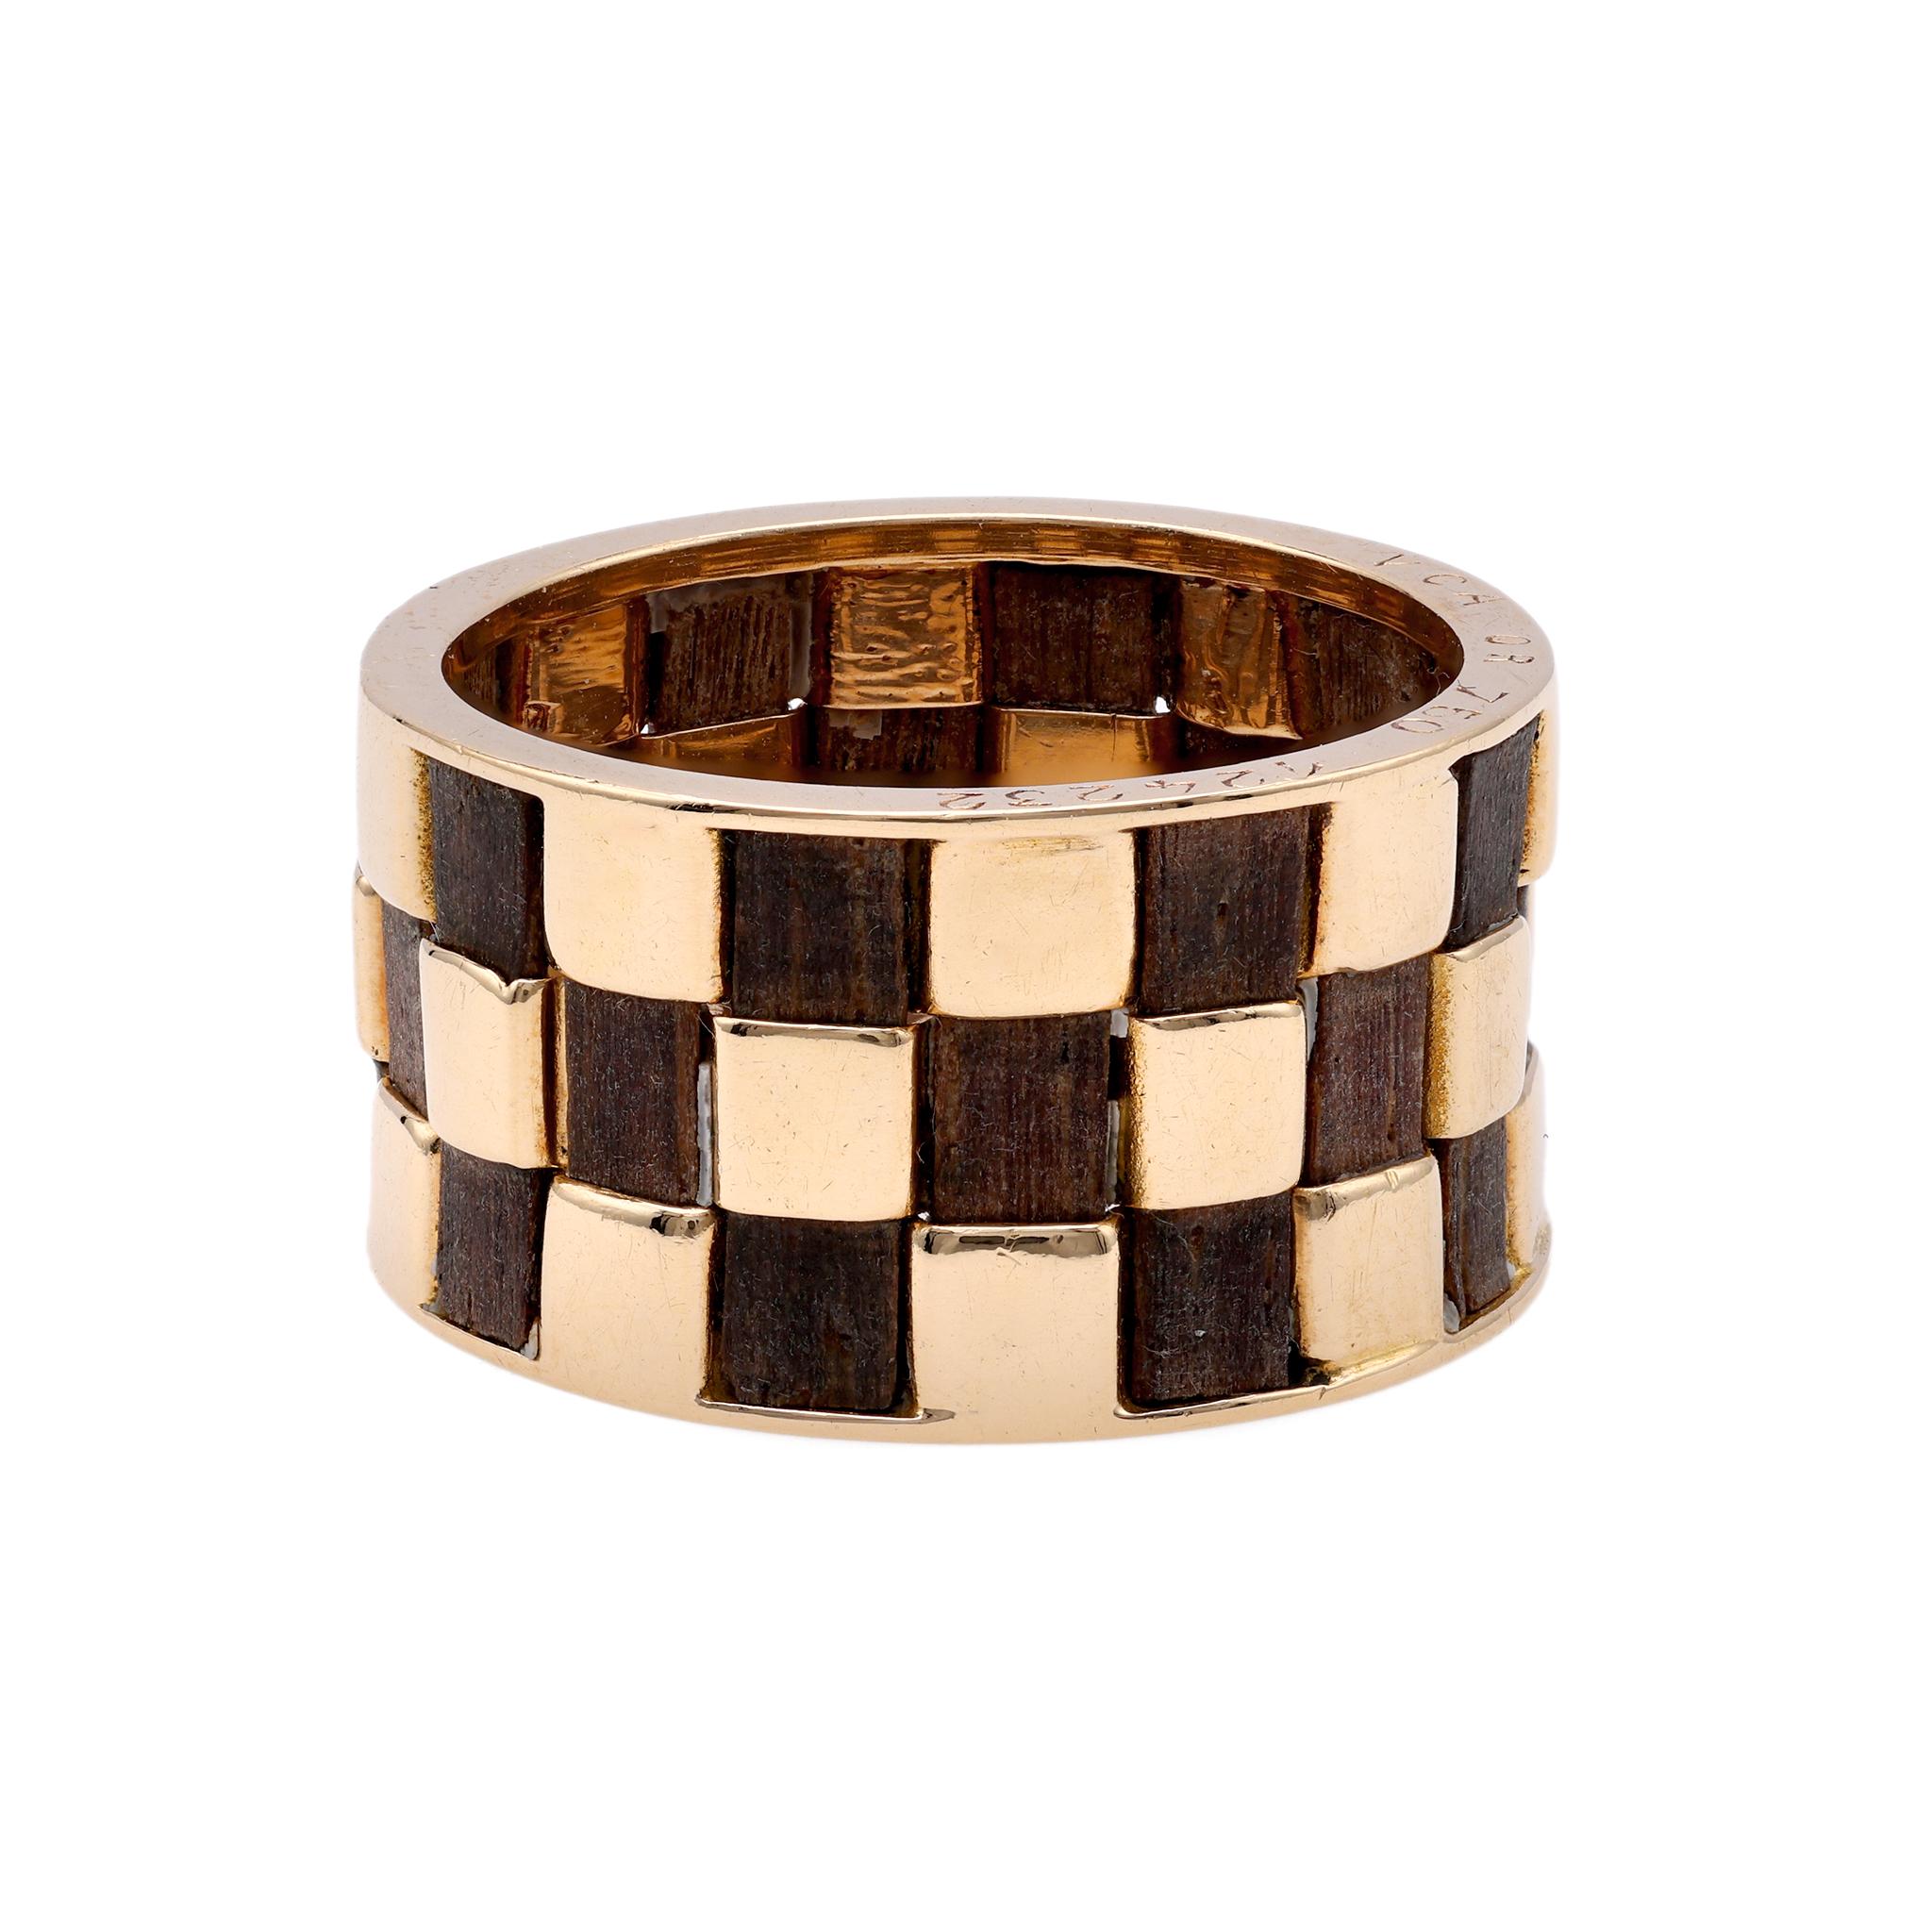 Vintage French Van Cleef & Arpels Wood 18k Yellow Gold Band Ring In Excellent Condition For Sale In Beverly Hills, CA